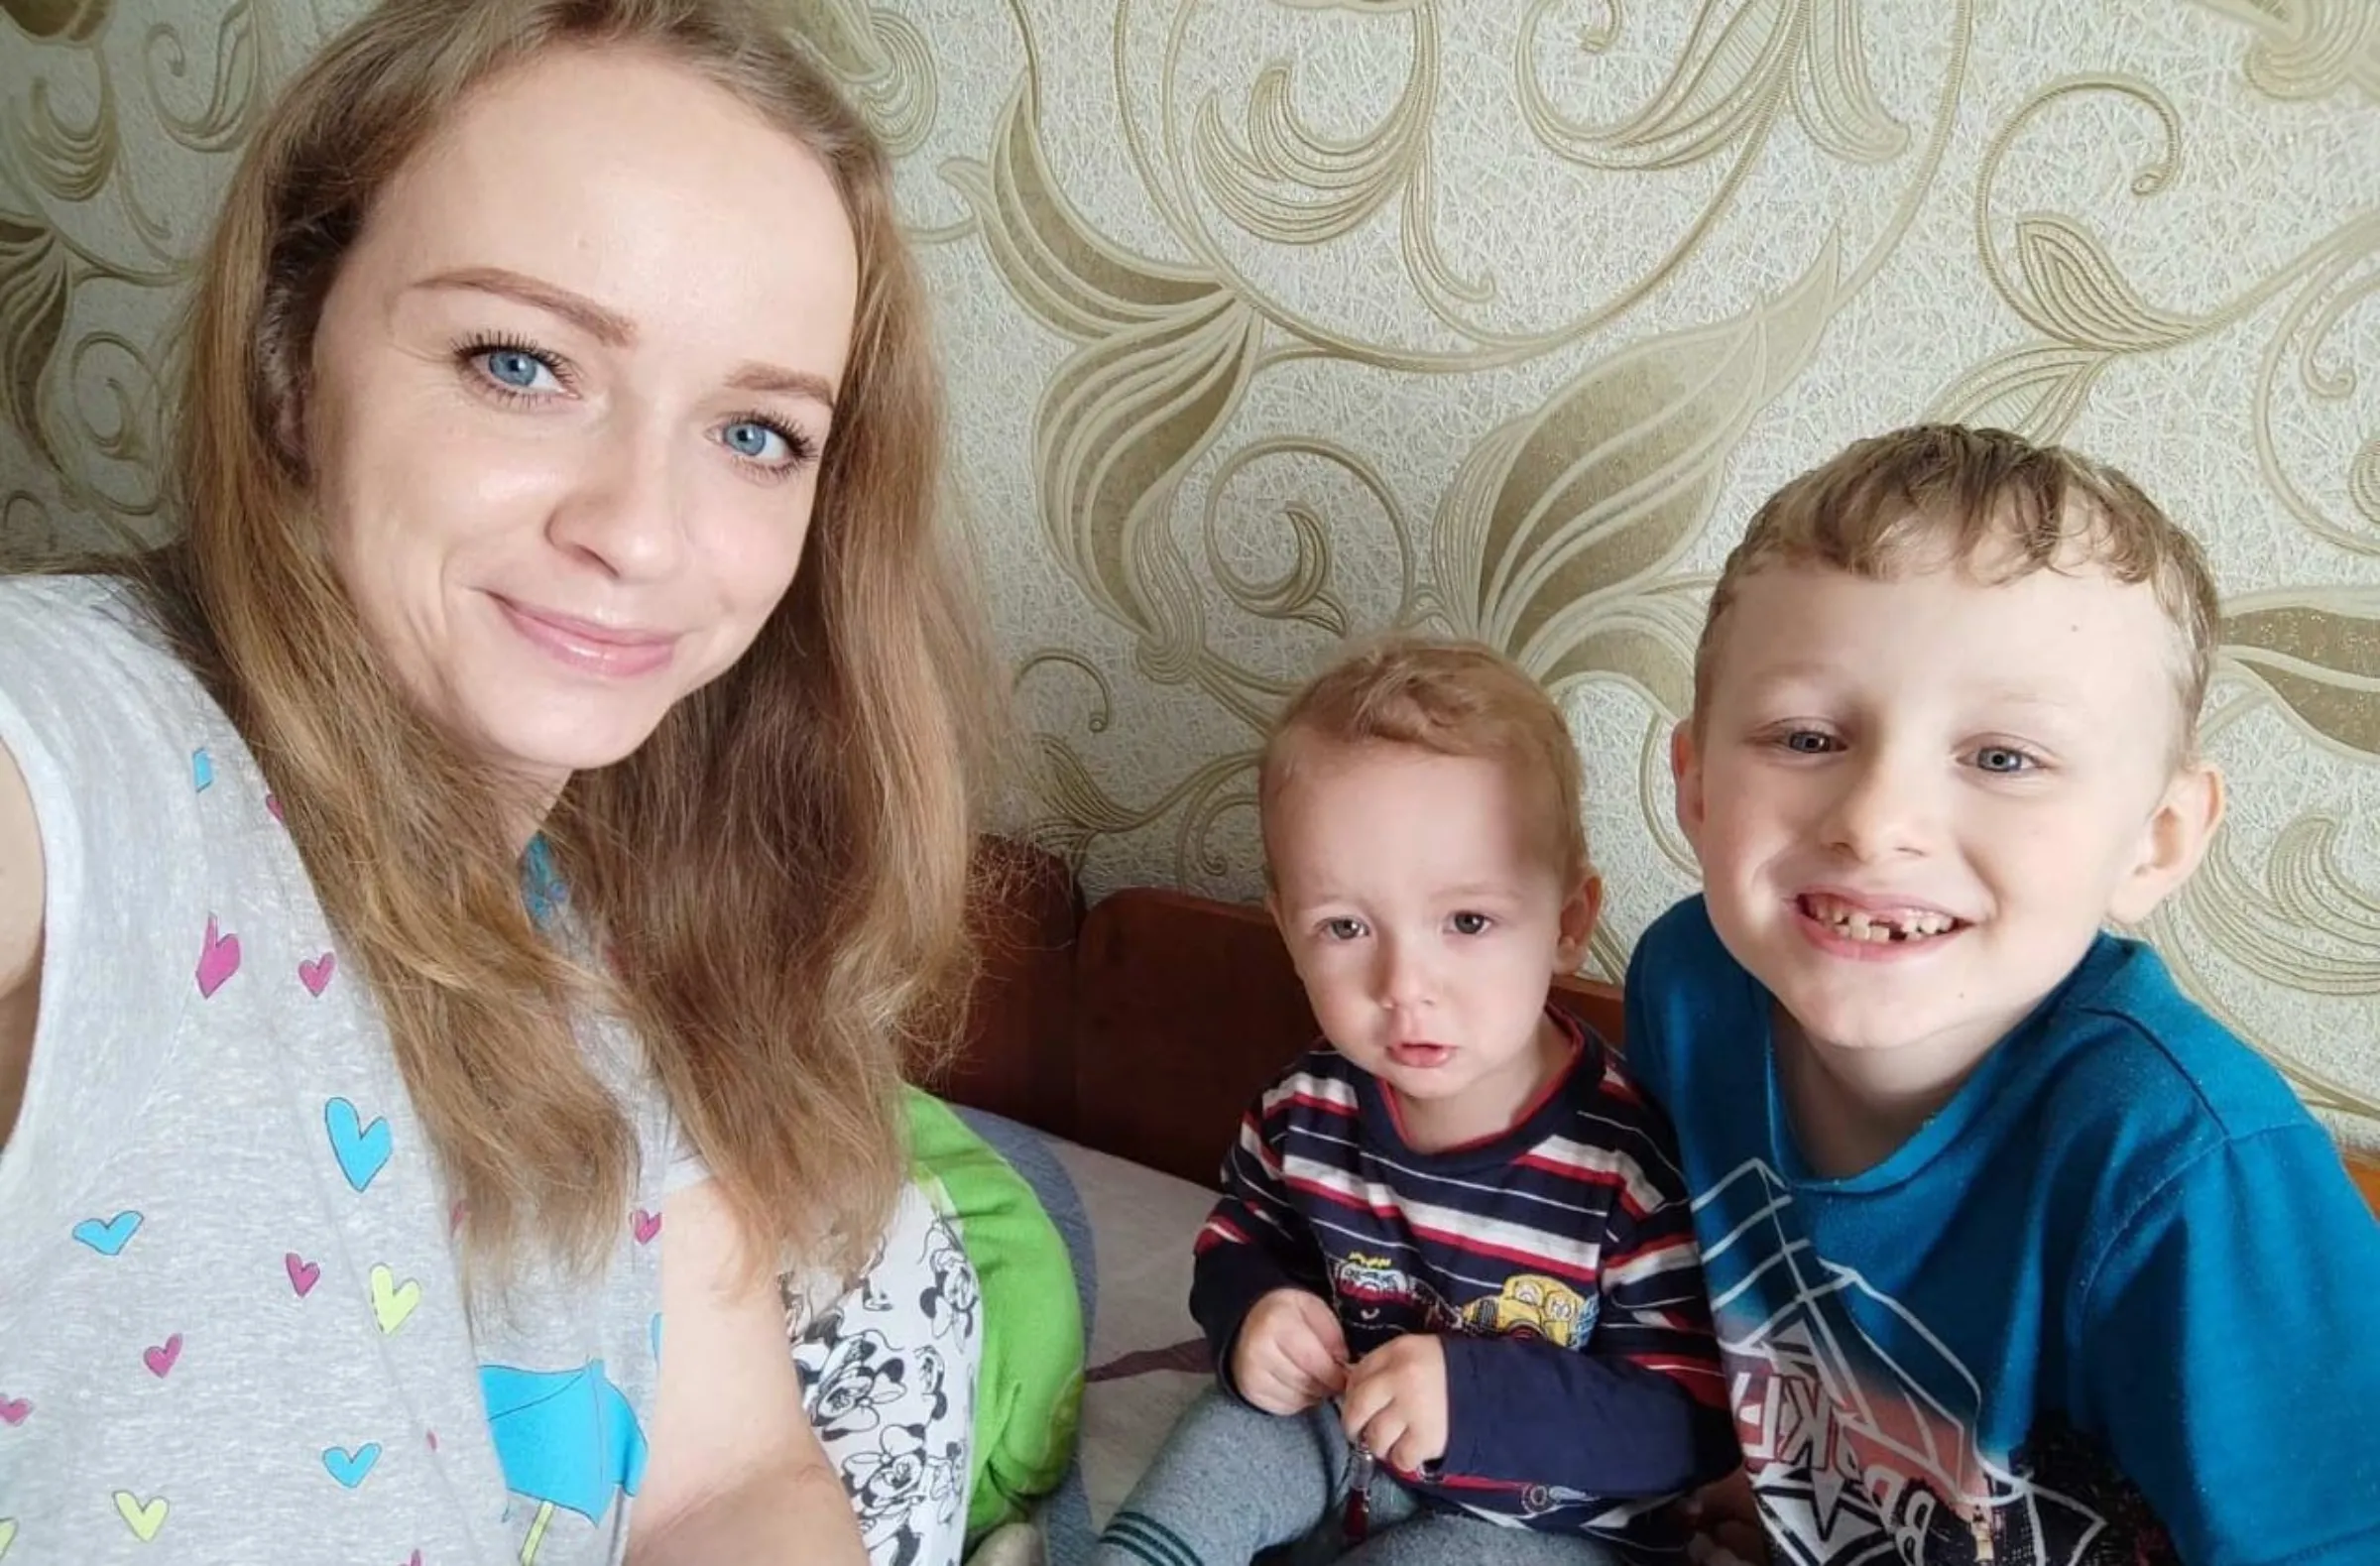 Svitlana Honcharova, 31, is pictured in a selfie taken with her sons Miron, 2, and Dmitry, 5, at their home in Sumy, northeast Ukraine, on March 25, 2022. Thomson Reuters Foundation/Svitlana Honcharova